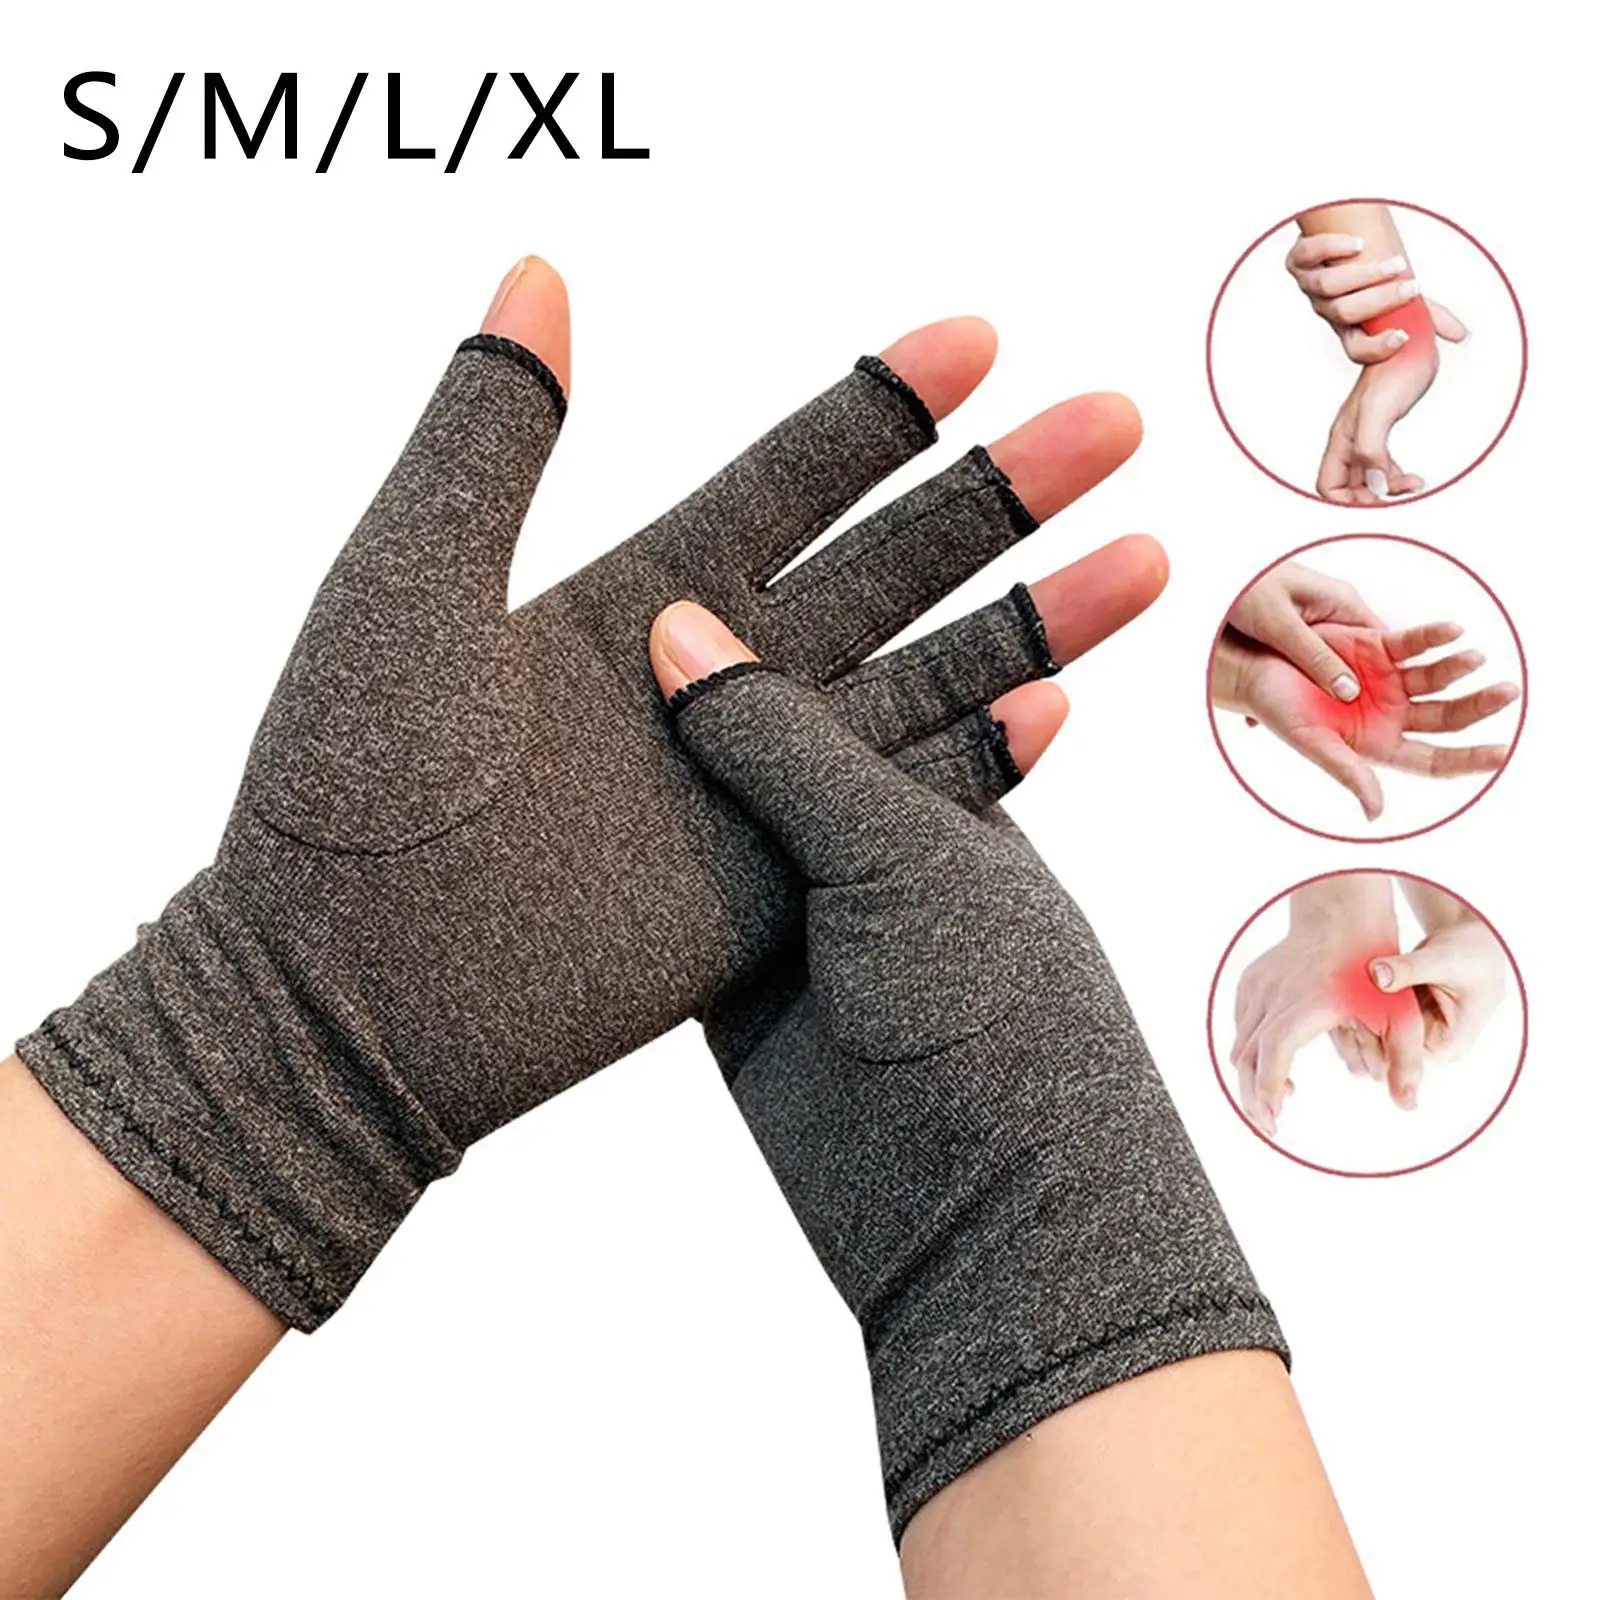 Fingerless Arthritis Compression Gloves Breathable for Cycling Training